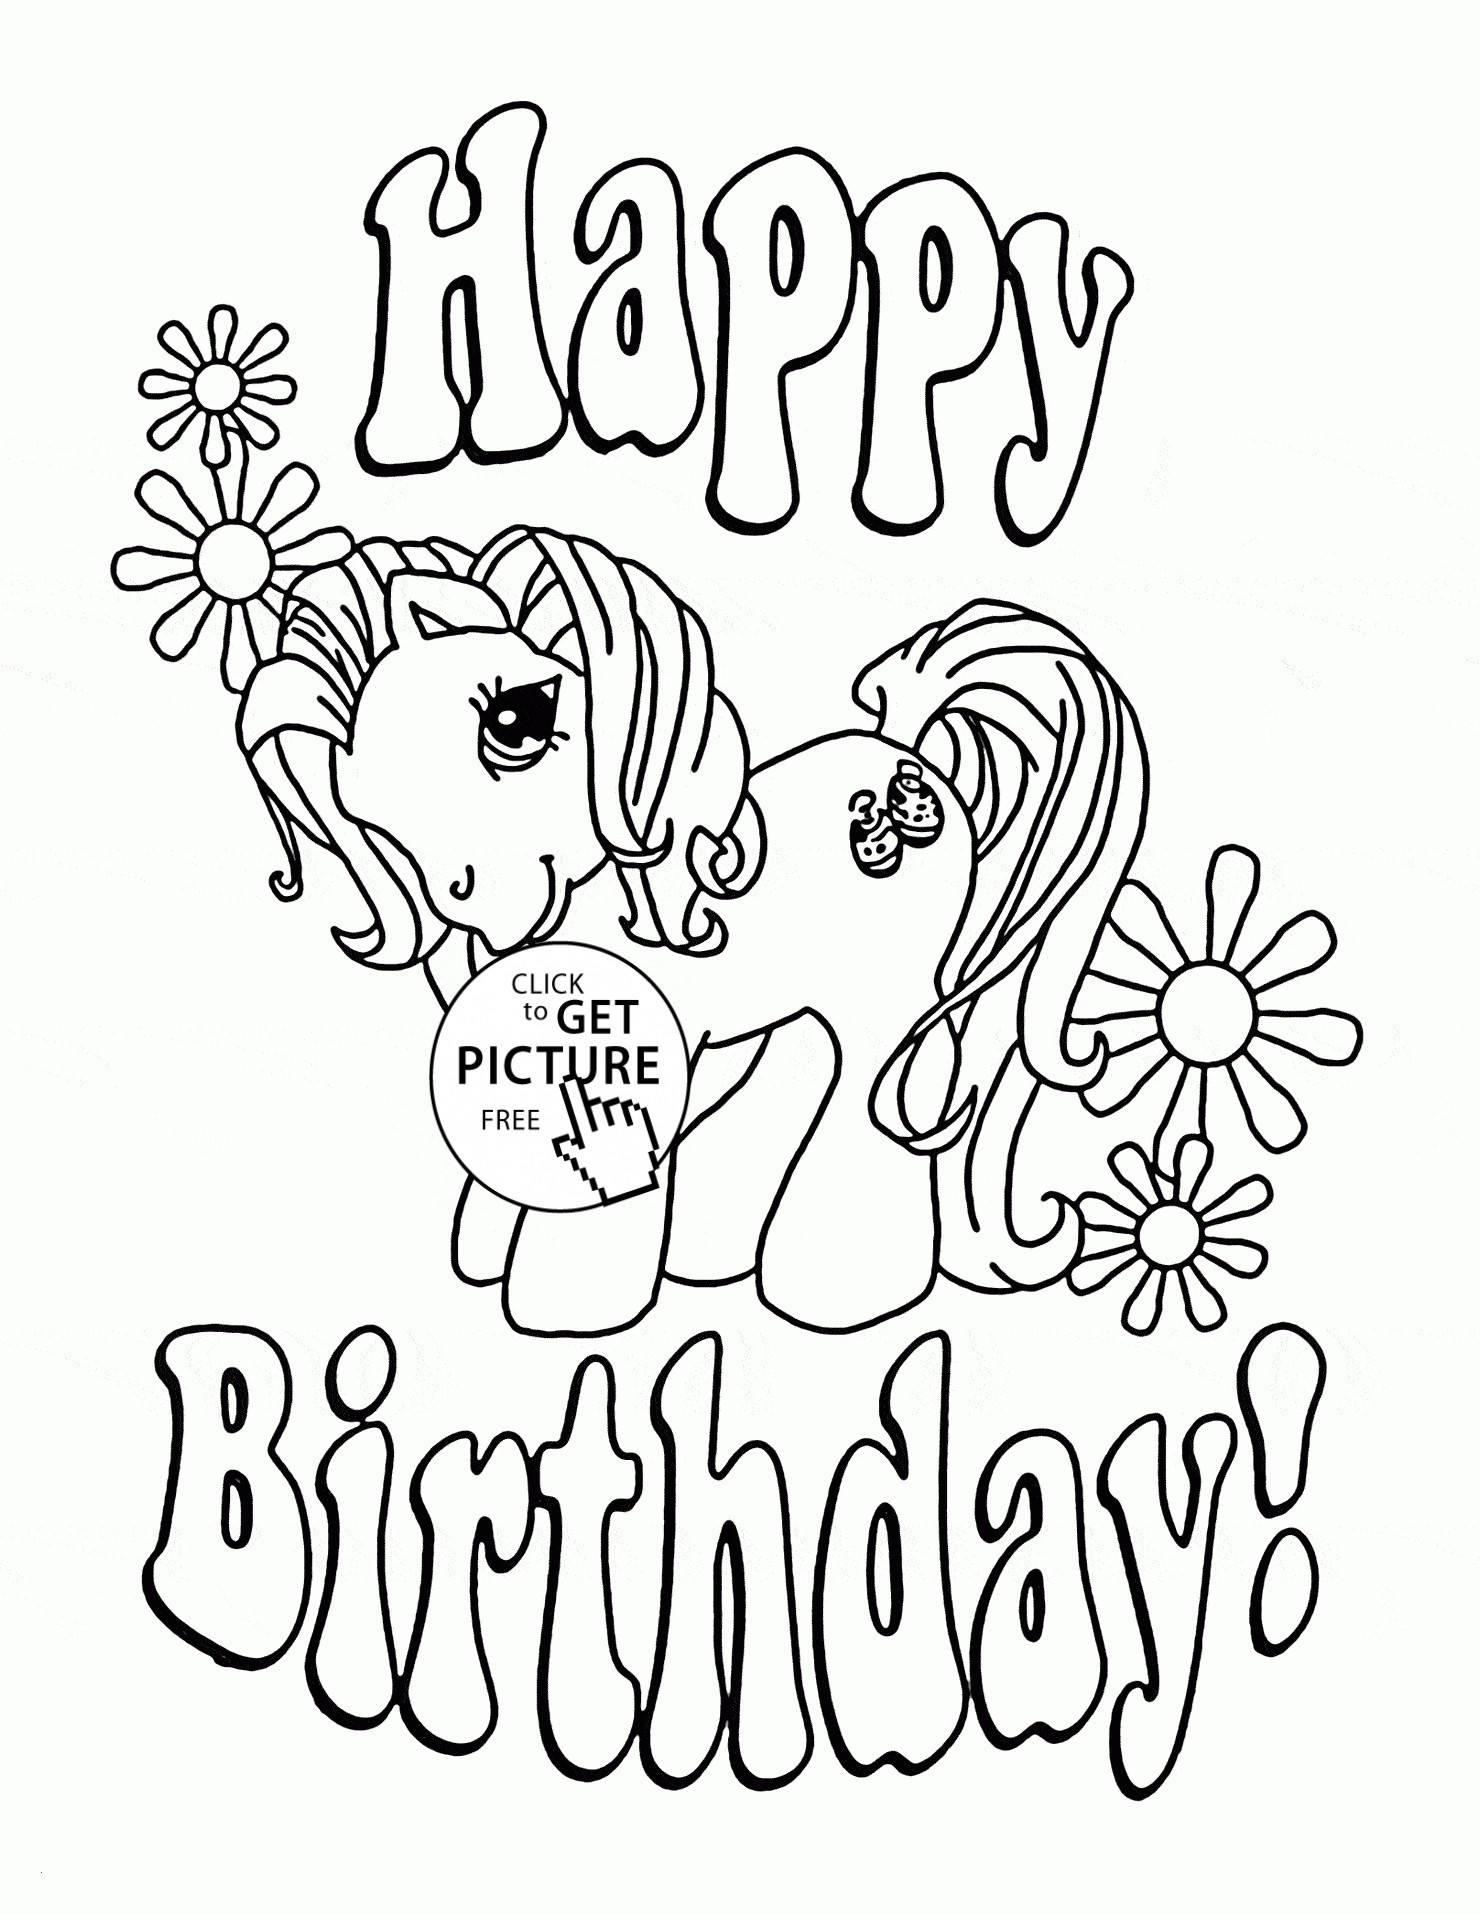 Birthday Balloons Coloring Pages Best Happy Birthday Coloring Pages for Kids New My Little Pony